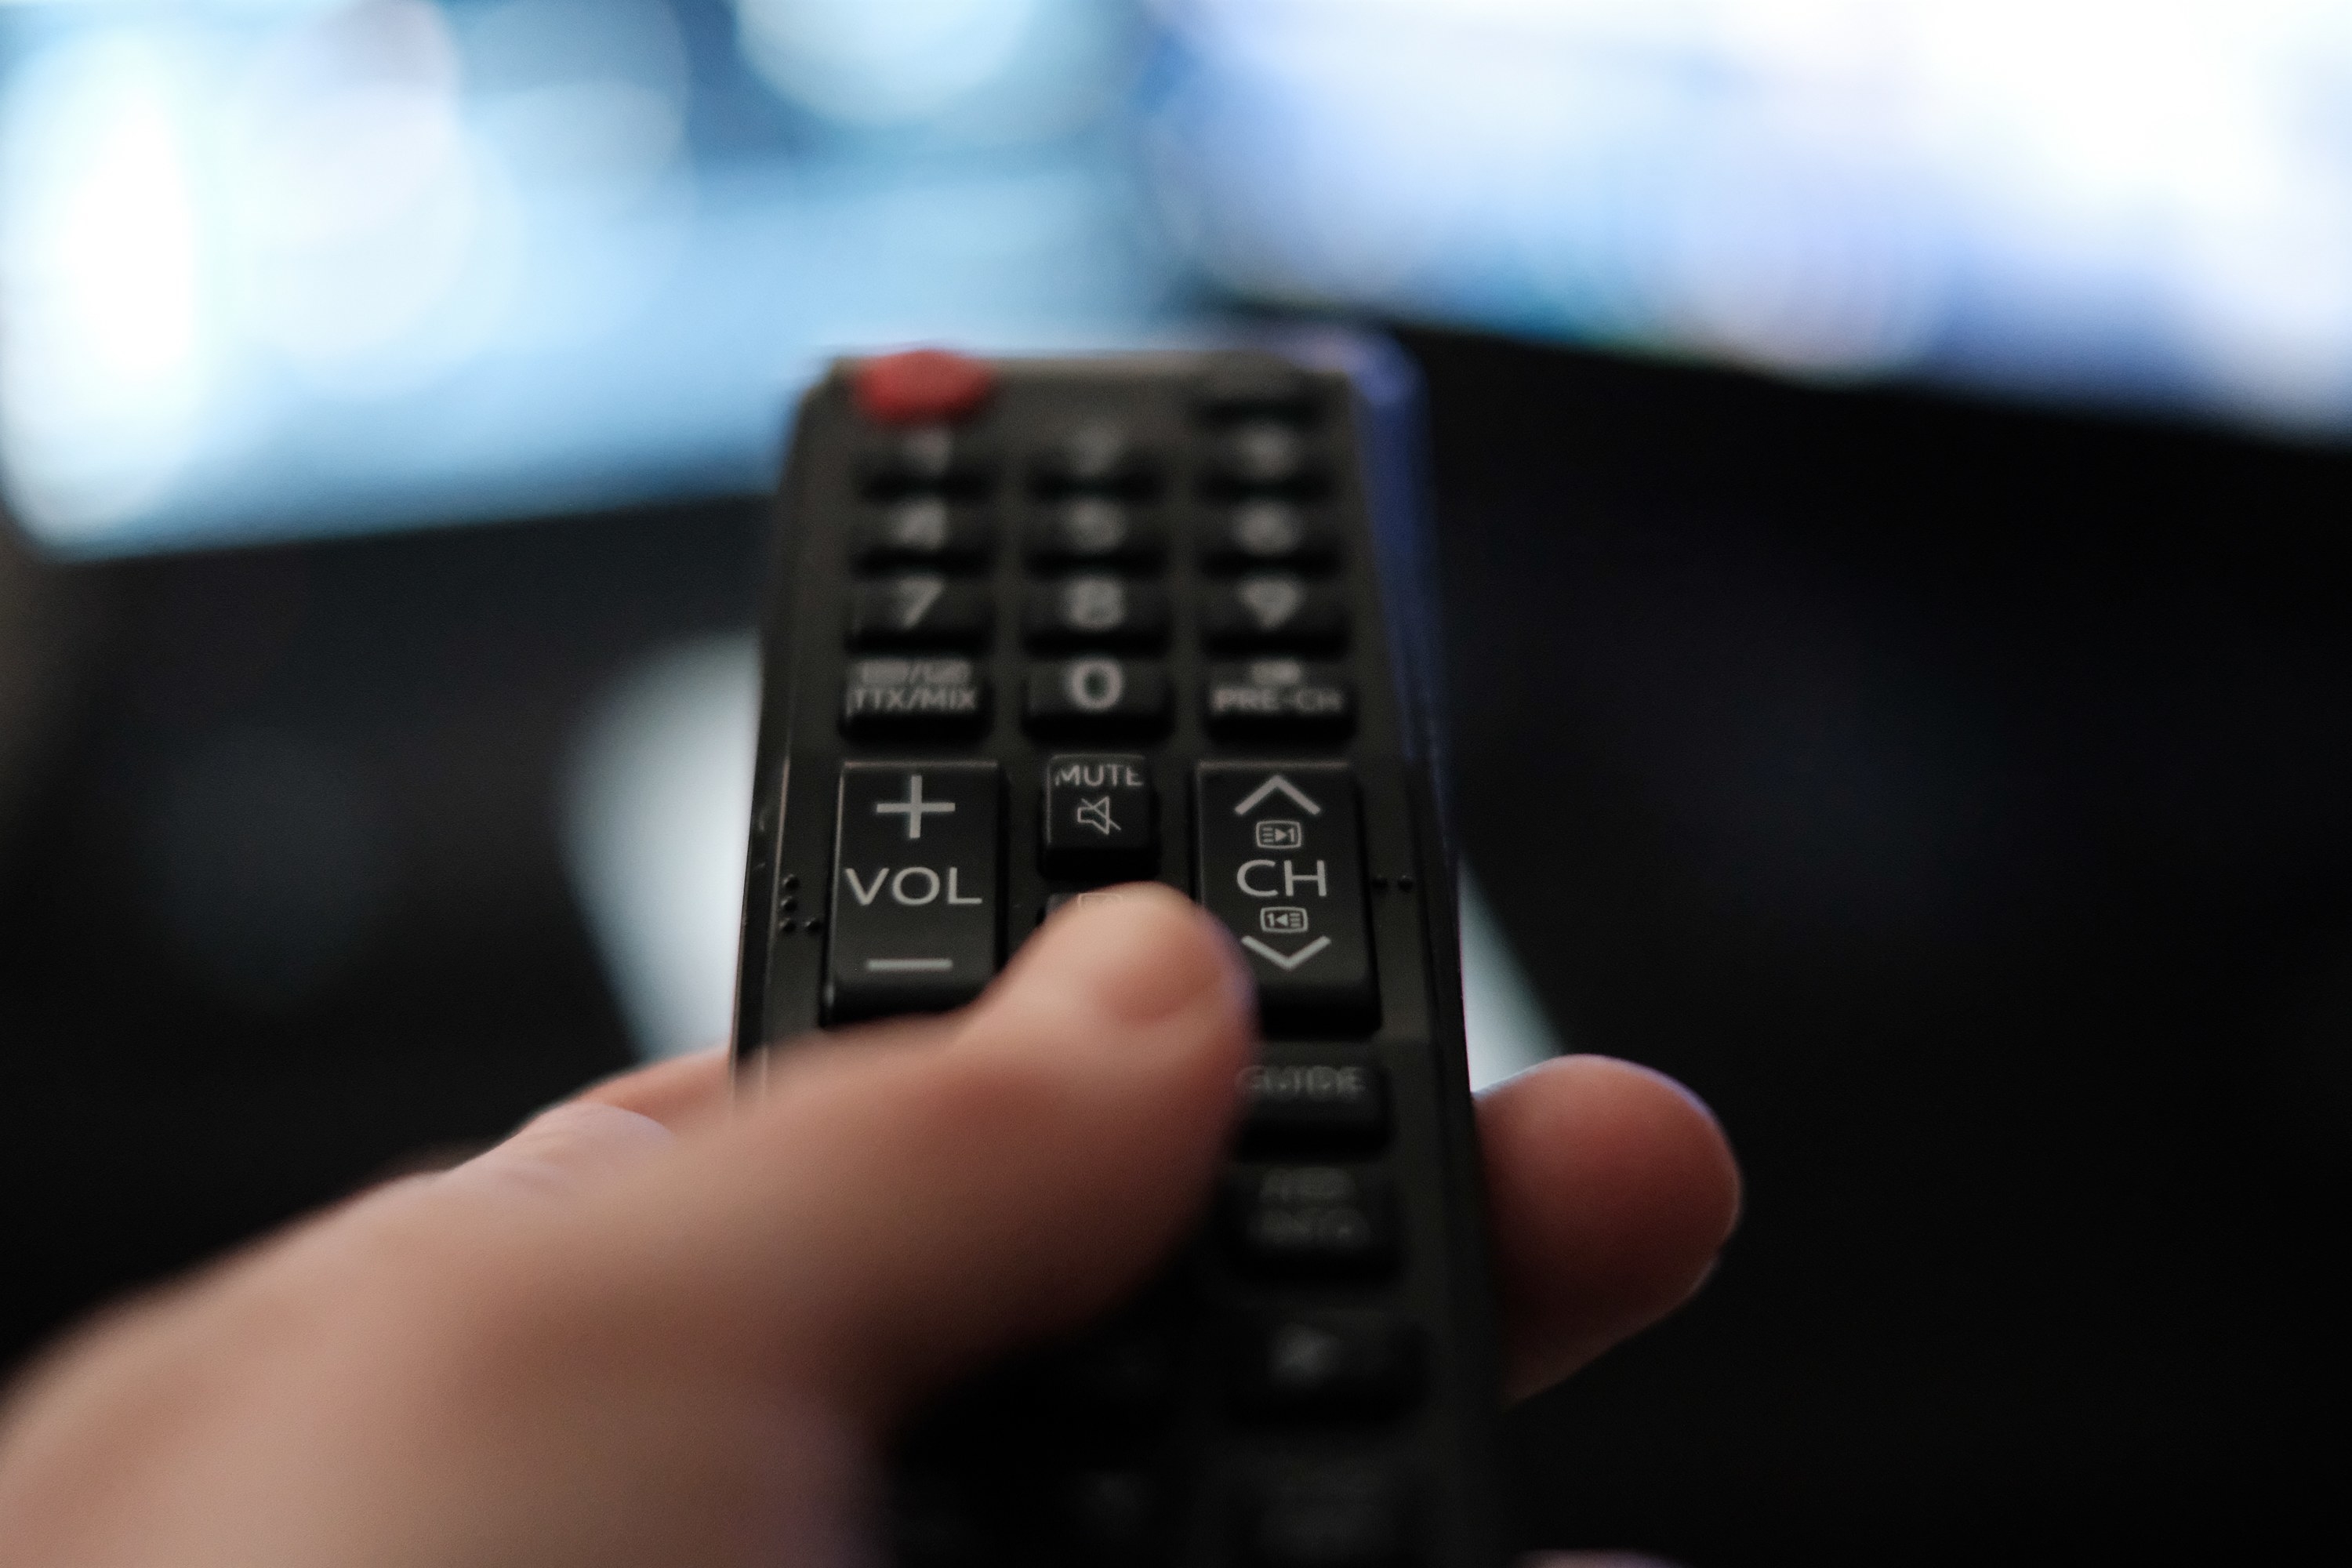 A person uses the remote to search through channels on the TV